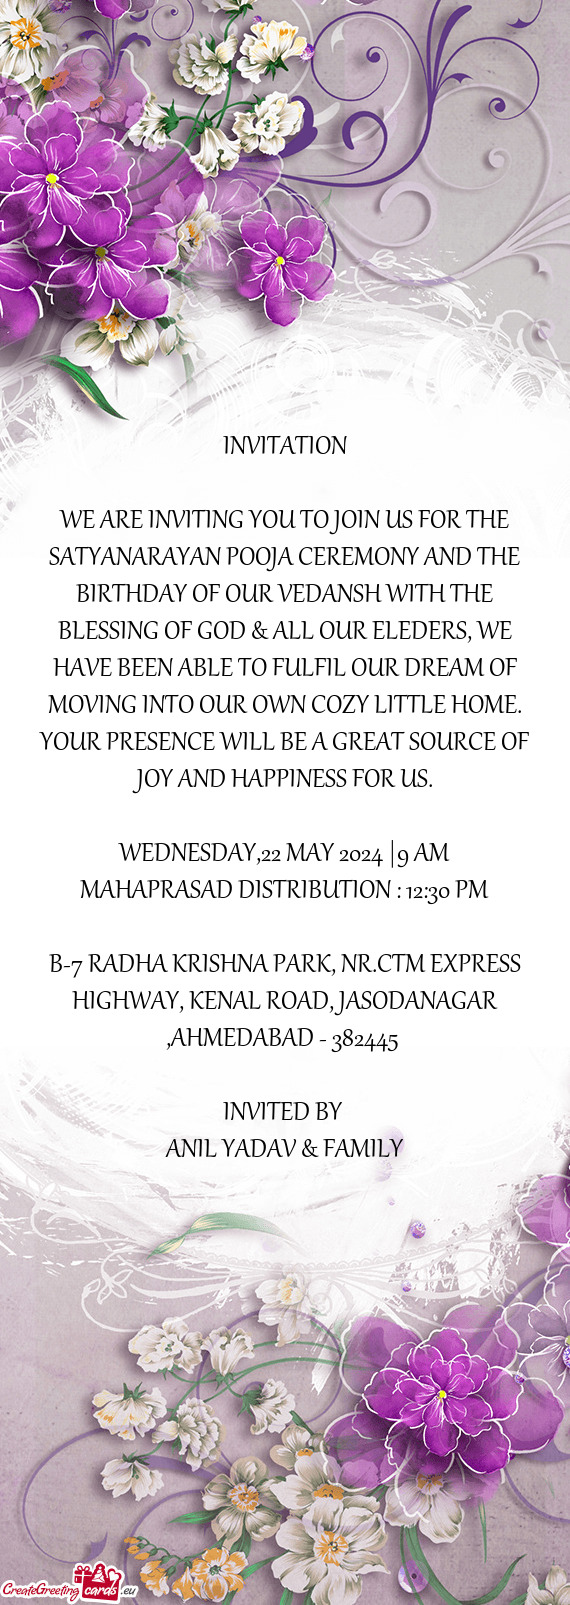 ITH THE BLESSING OF GOD & ALL OUR ELEDERS, WE HAVE BEEN ABLE TO FULFIL OUR DREAM OF MOVING INTO OUR